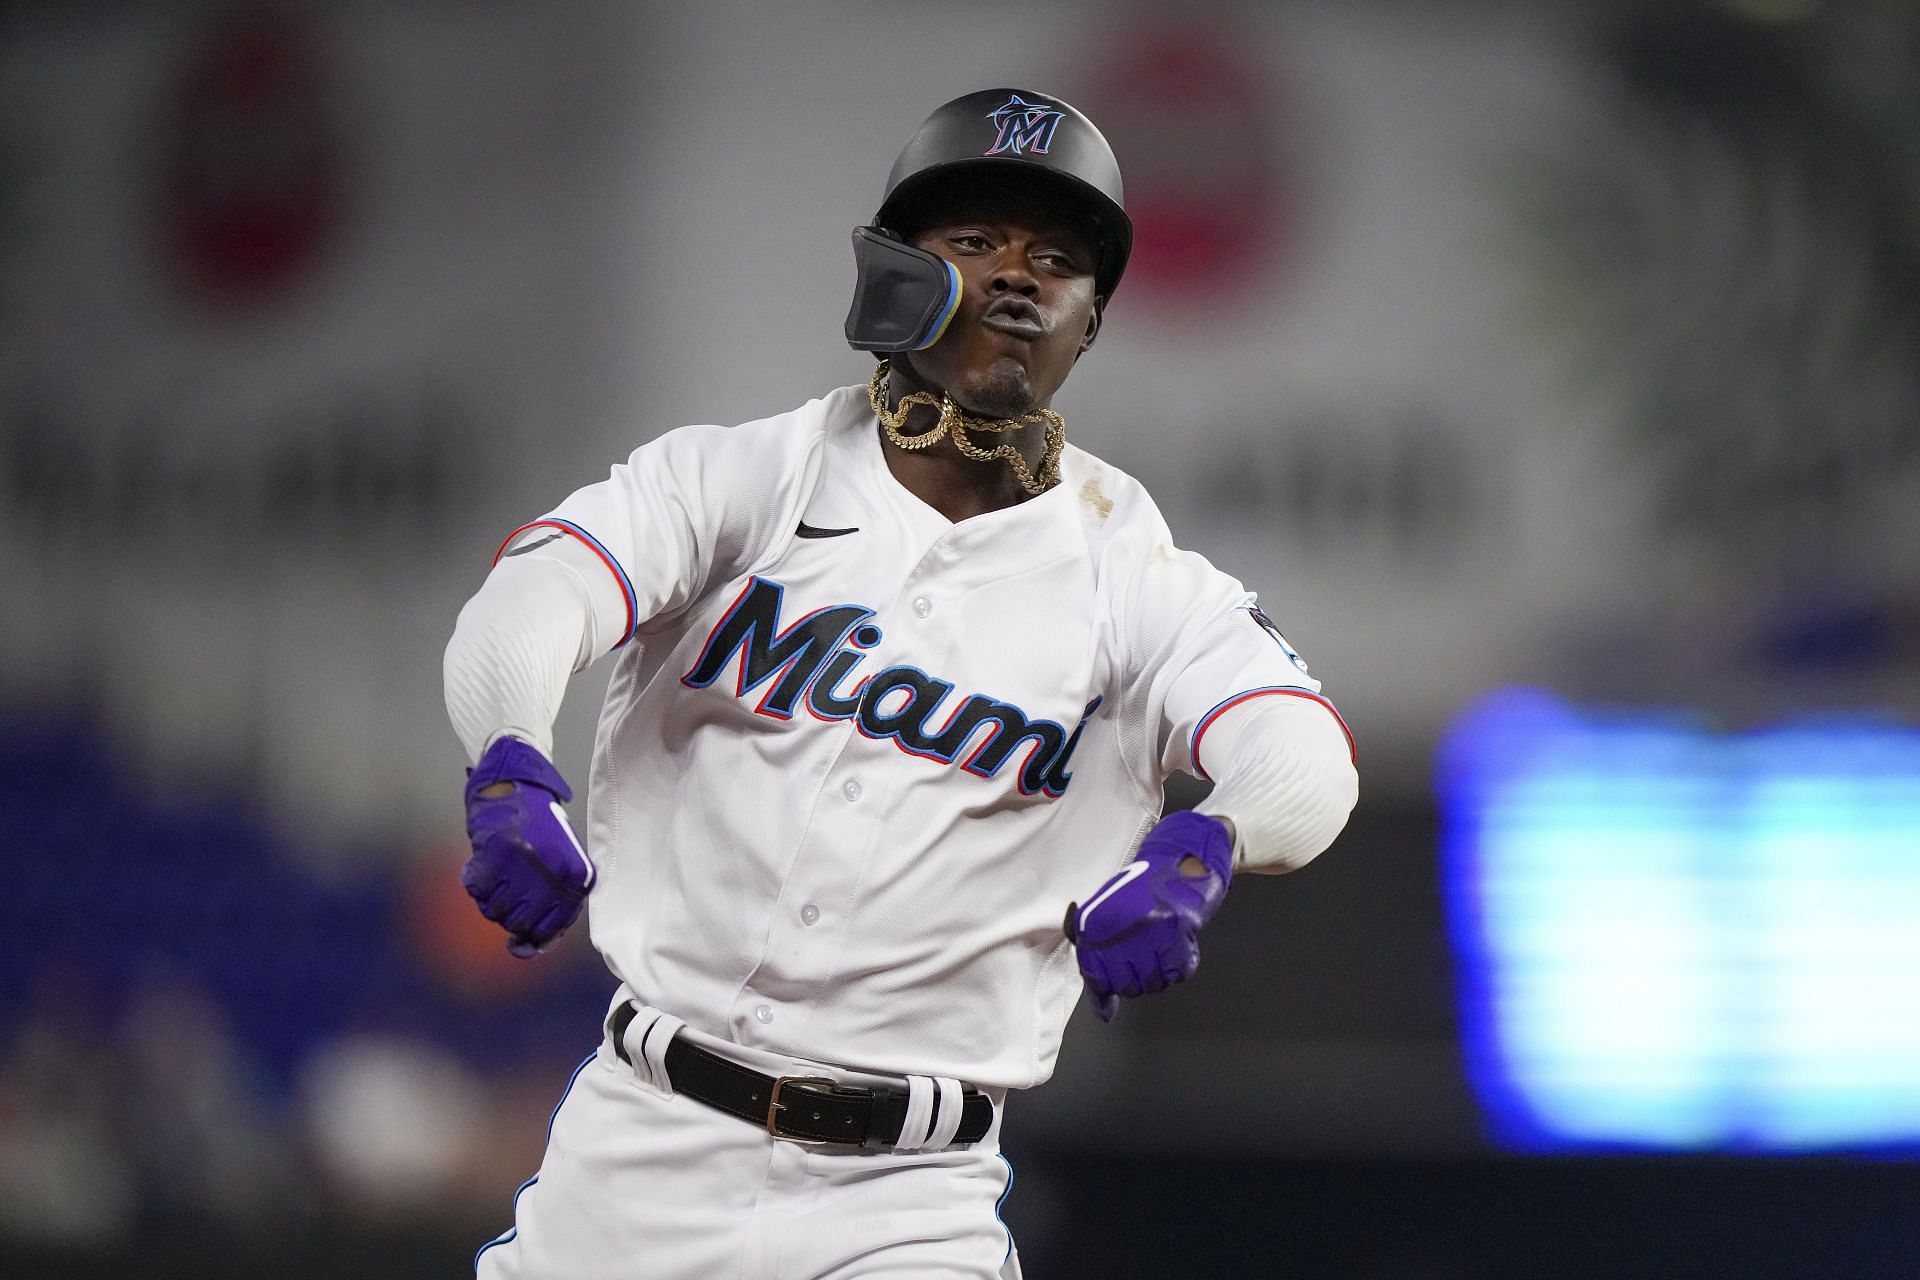 Marlins' Jazz Chisholm breaks down the most entertaining at-bat of